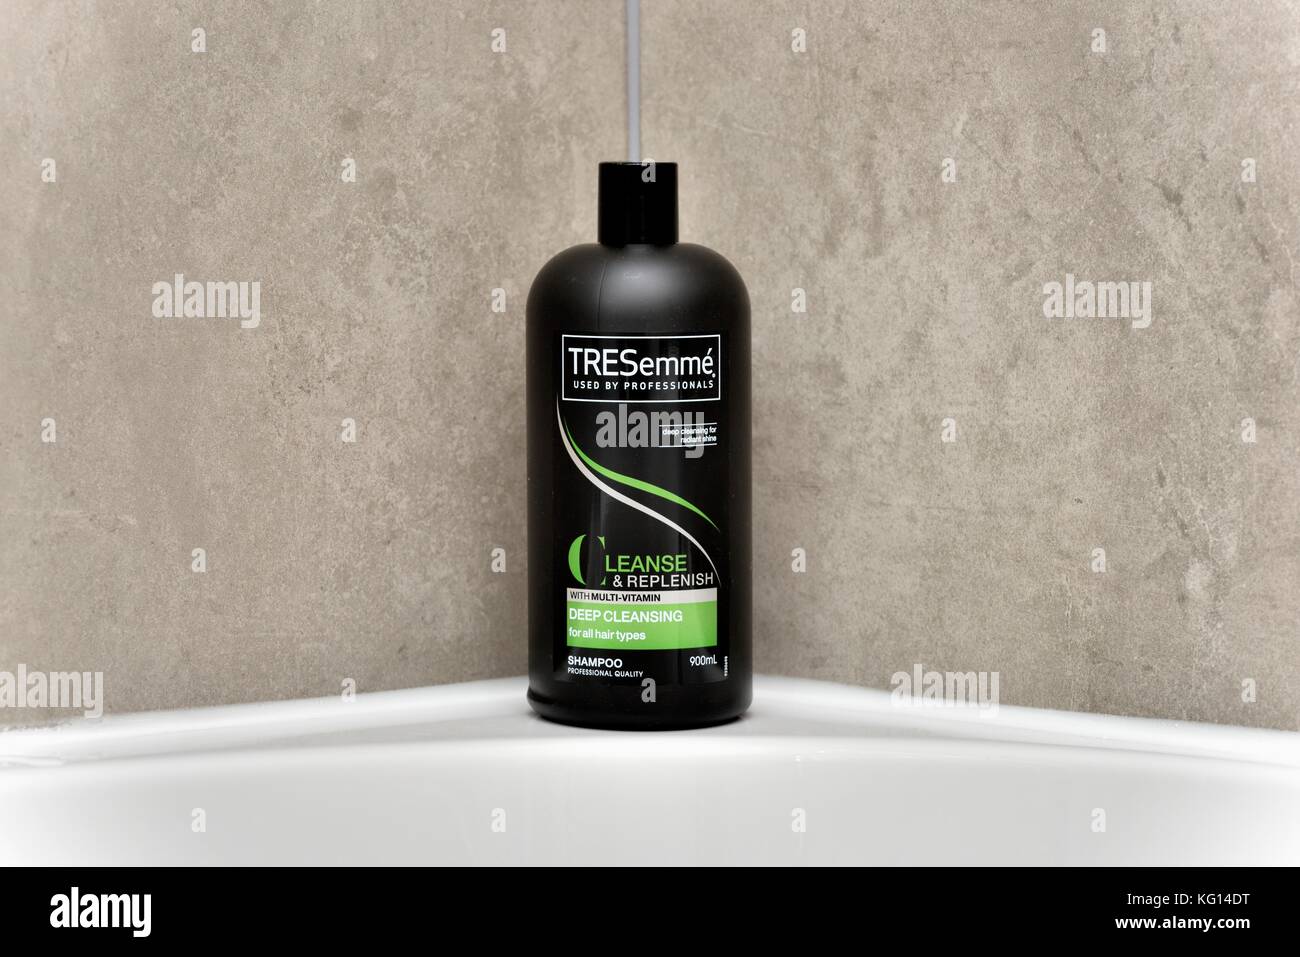 Tresemme deep cleansing shampoo Stock Photo